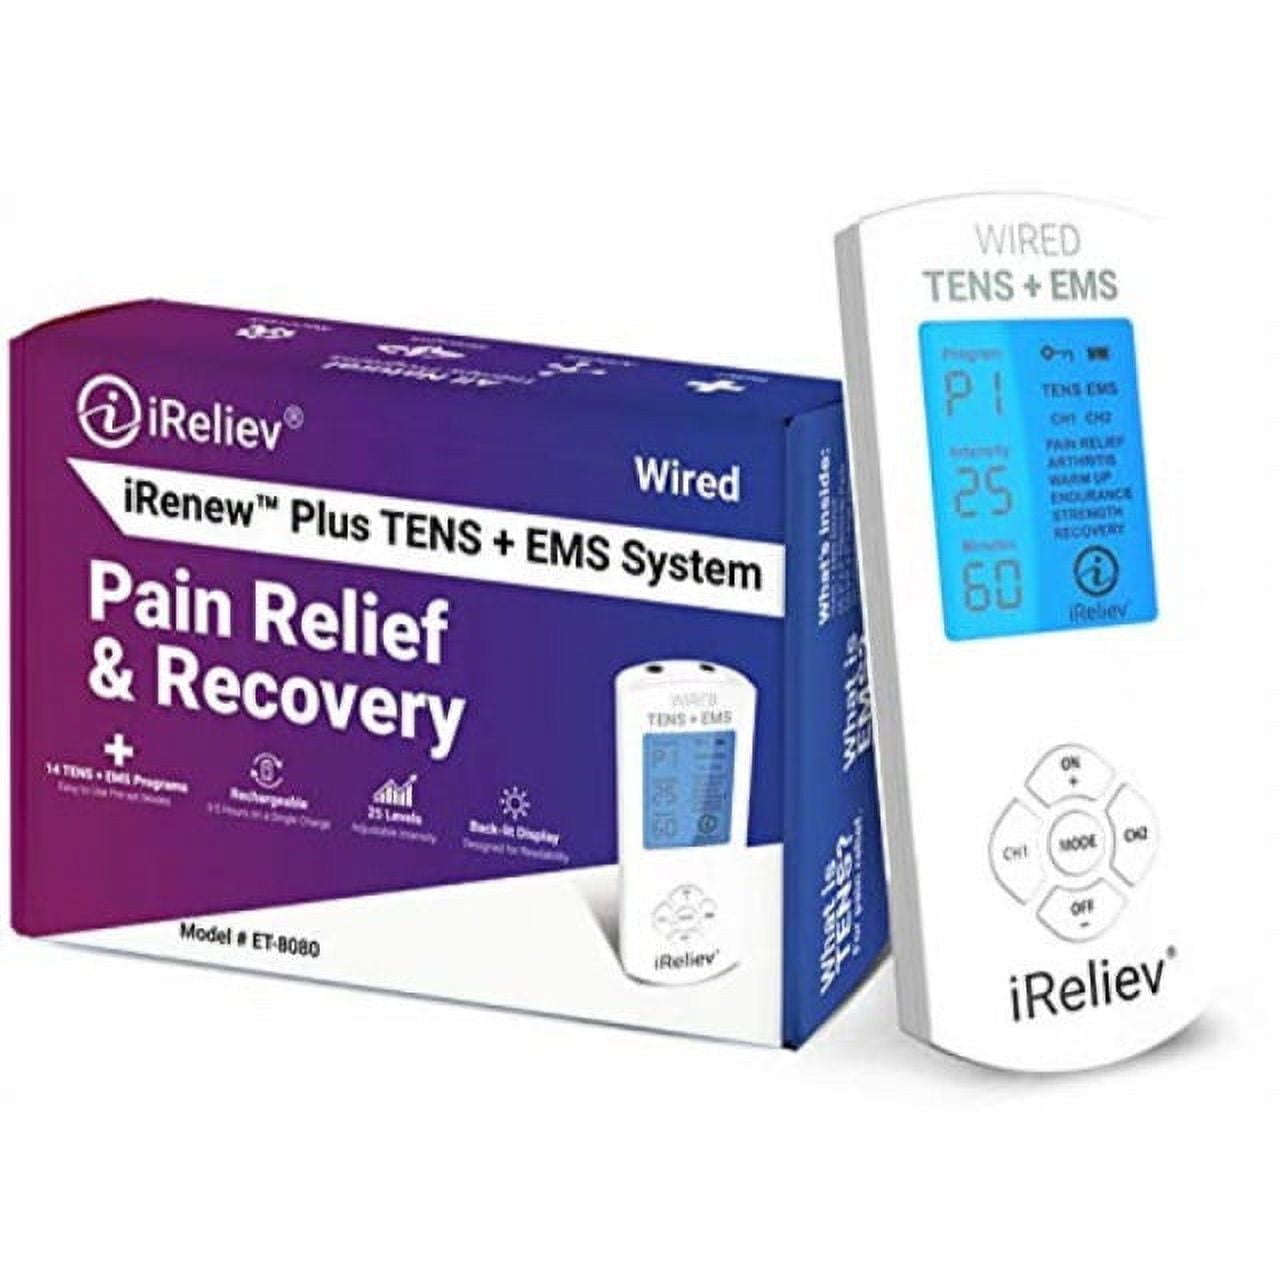 TENS Therapy – Fraser Valley Pain Clinic